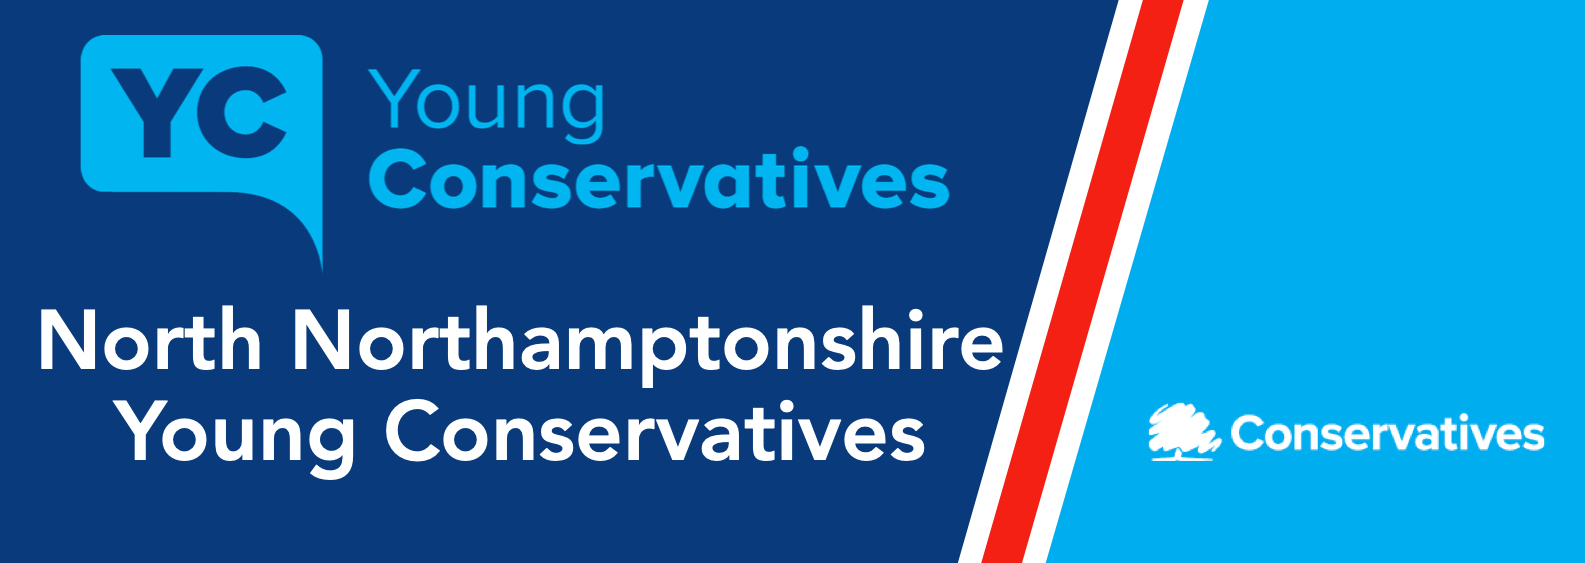 Kettering Young Conservatives local councillor council political involved 14-30